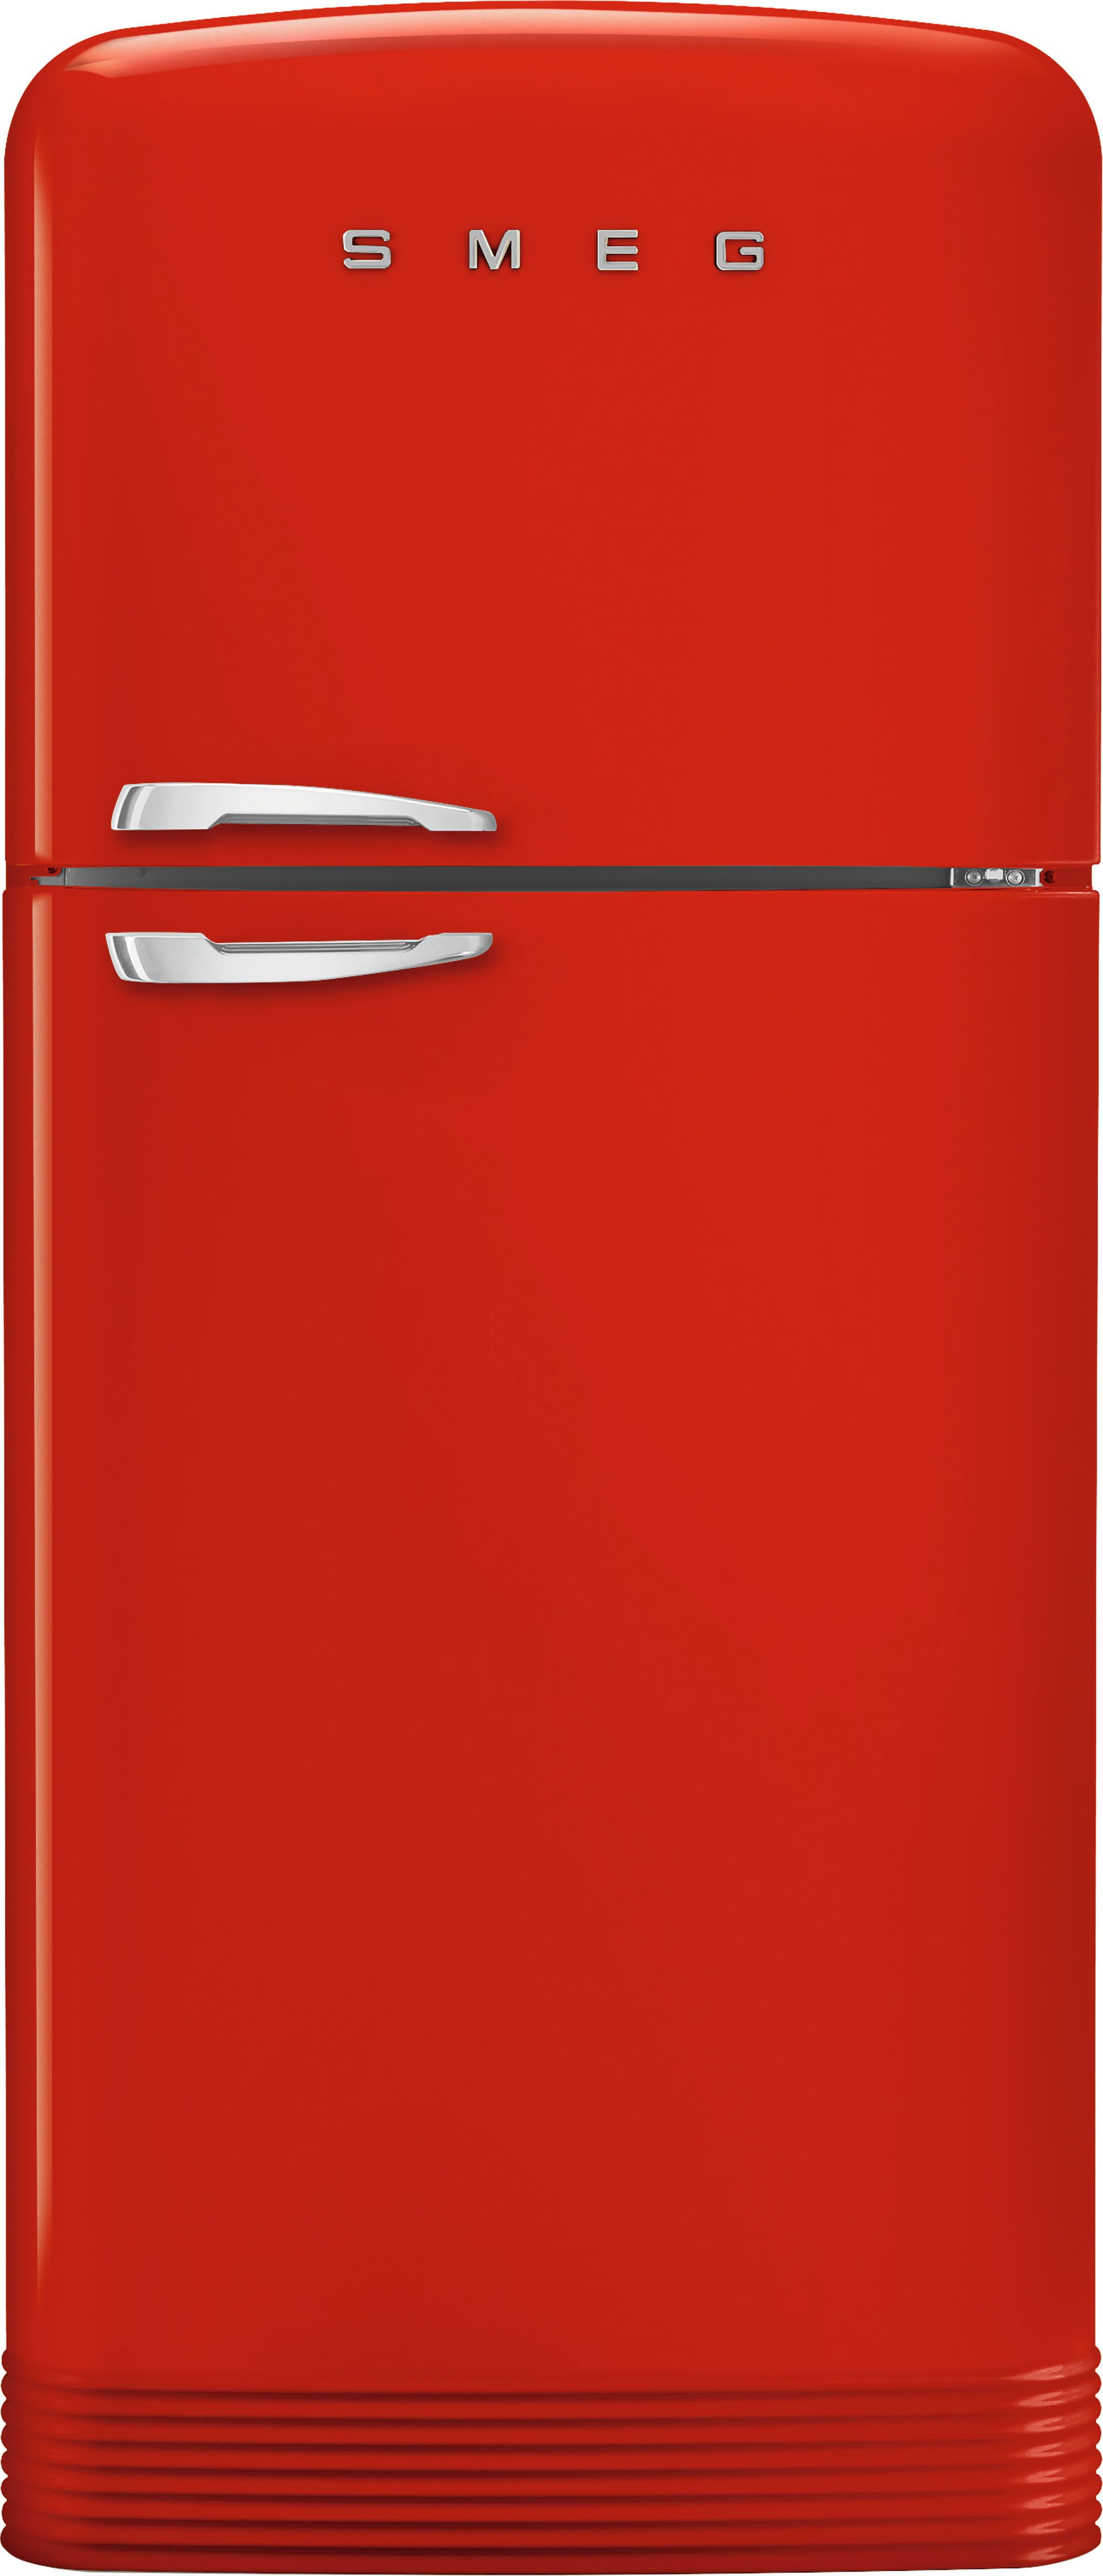 Smeg Right Hand Hinge FAB50RRD5 80/20 Frost Free Fridge Freezer - Red - E Rated, Red